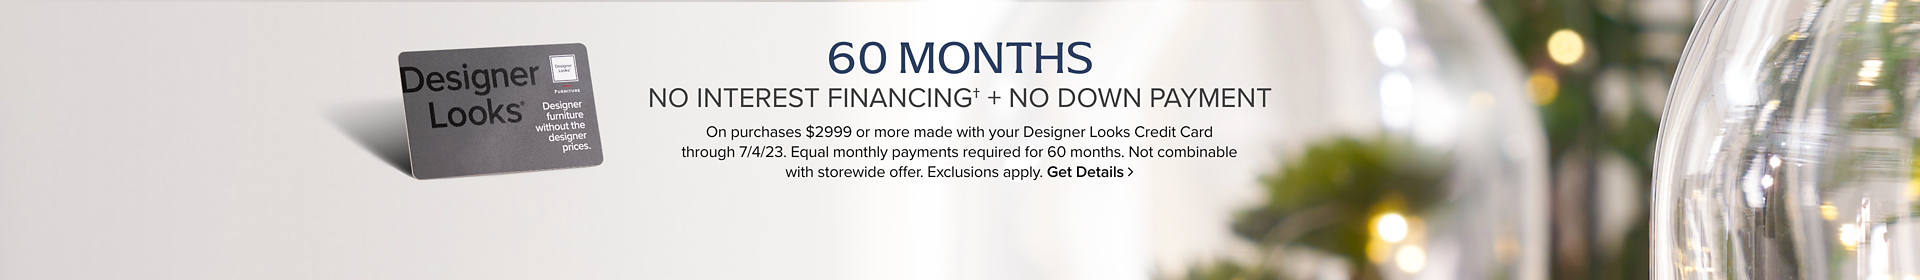 60 Months No interest financing* + no down payment